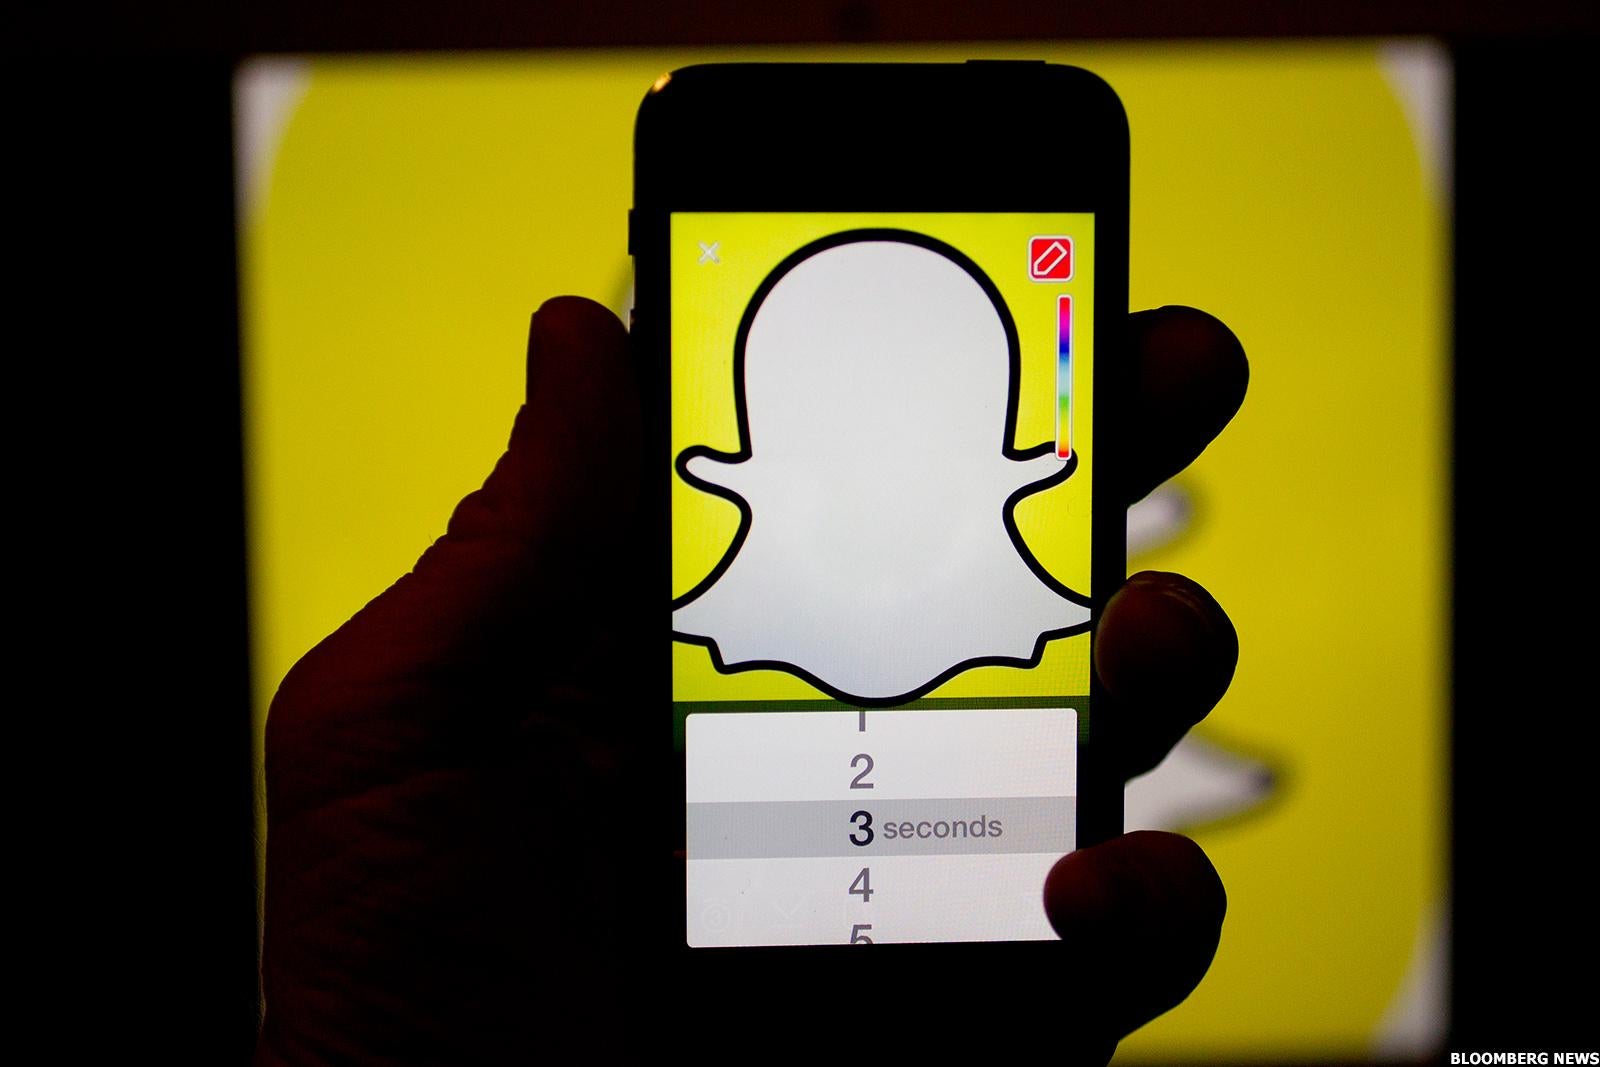 Tracking technology helped Snapchat increase its income from advertising spend but raises privacy concerns